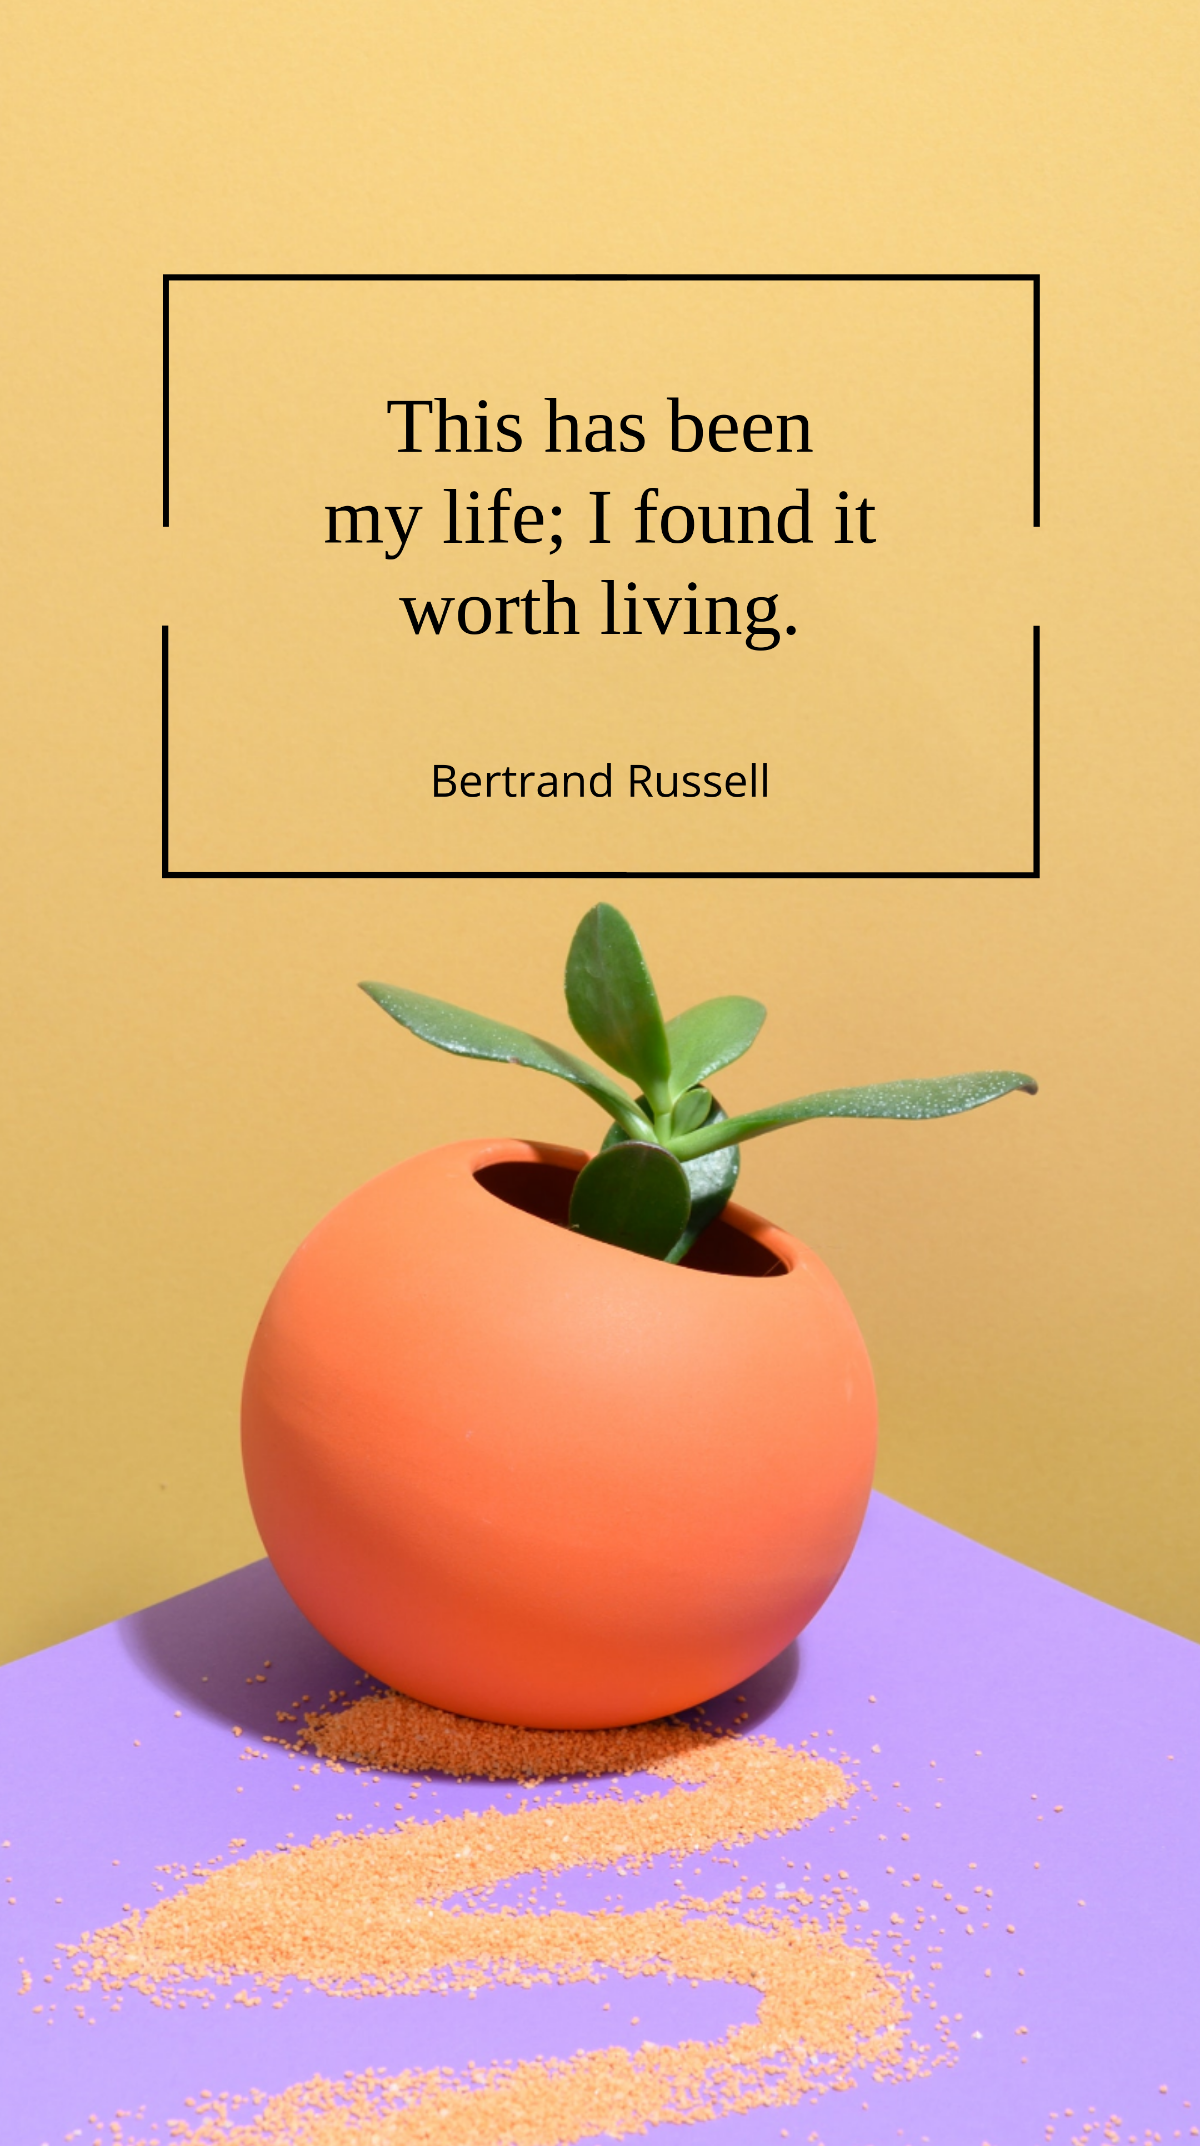 Bertrand Russell - “This has been my life; I found it worth living.” Template